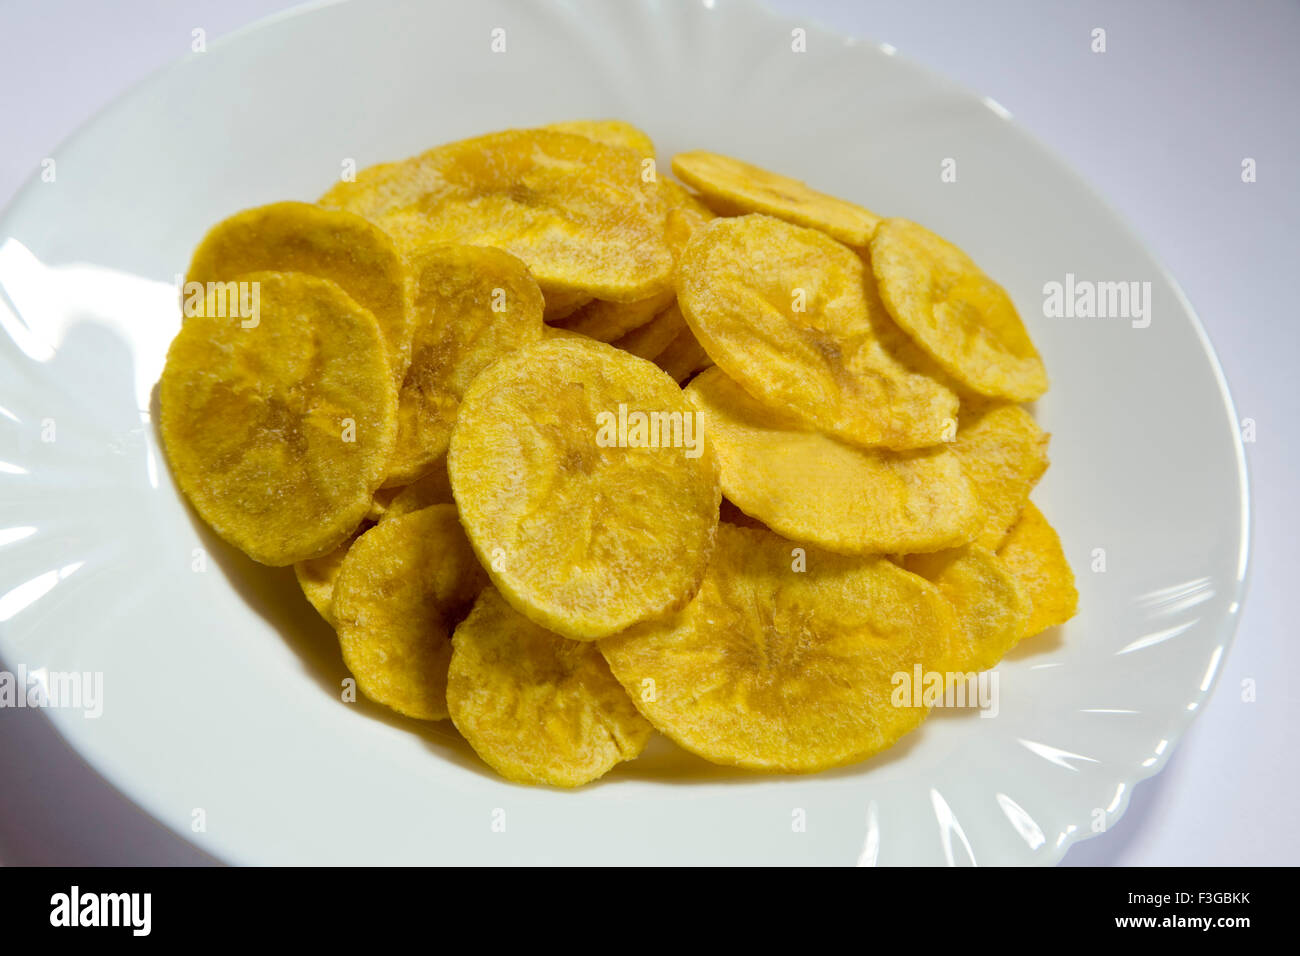 Junk food snacks salty banana chips or wafer served in plate Stock Photo